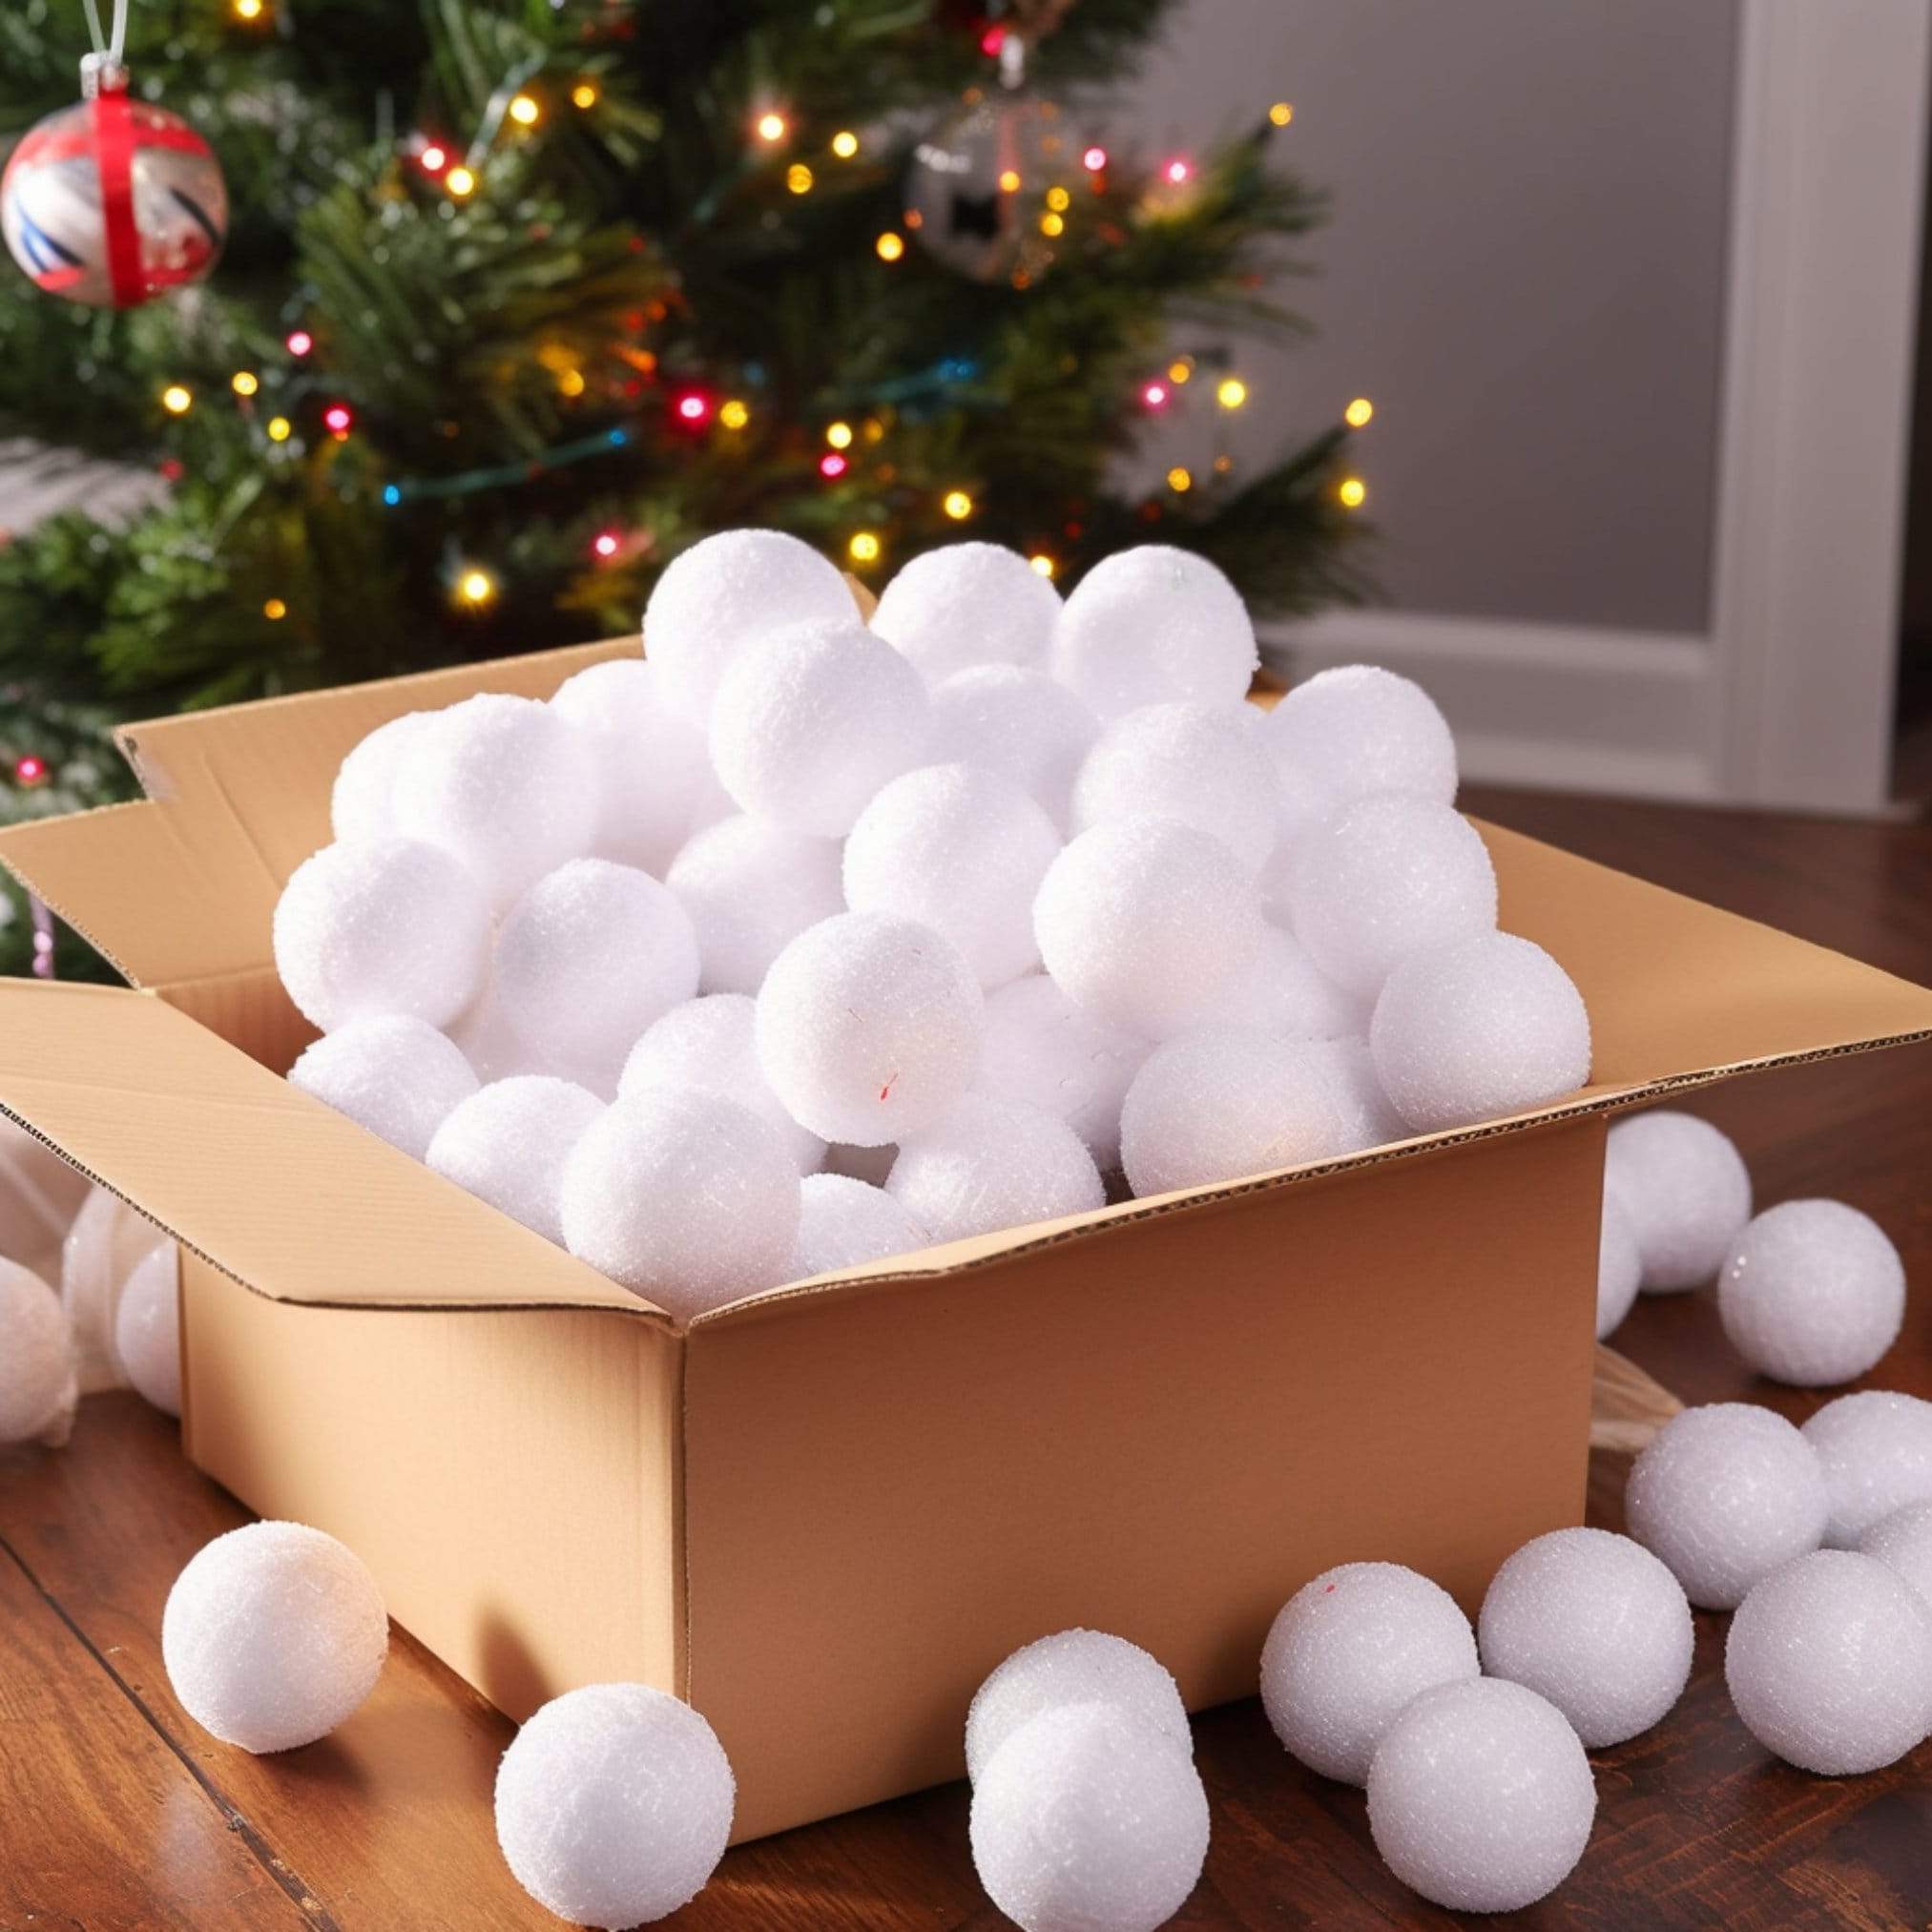 20 Indoor Fake Artificial Snowballs 6cm Realistic Snow Crunch Christmas  Display Xmas Fun Snow Ball Fight. Clean No Mess Fun Snow Like Touch